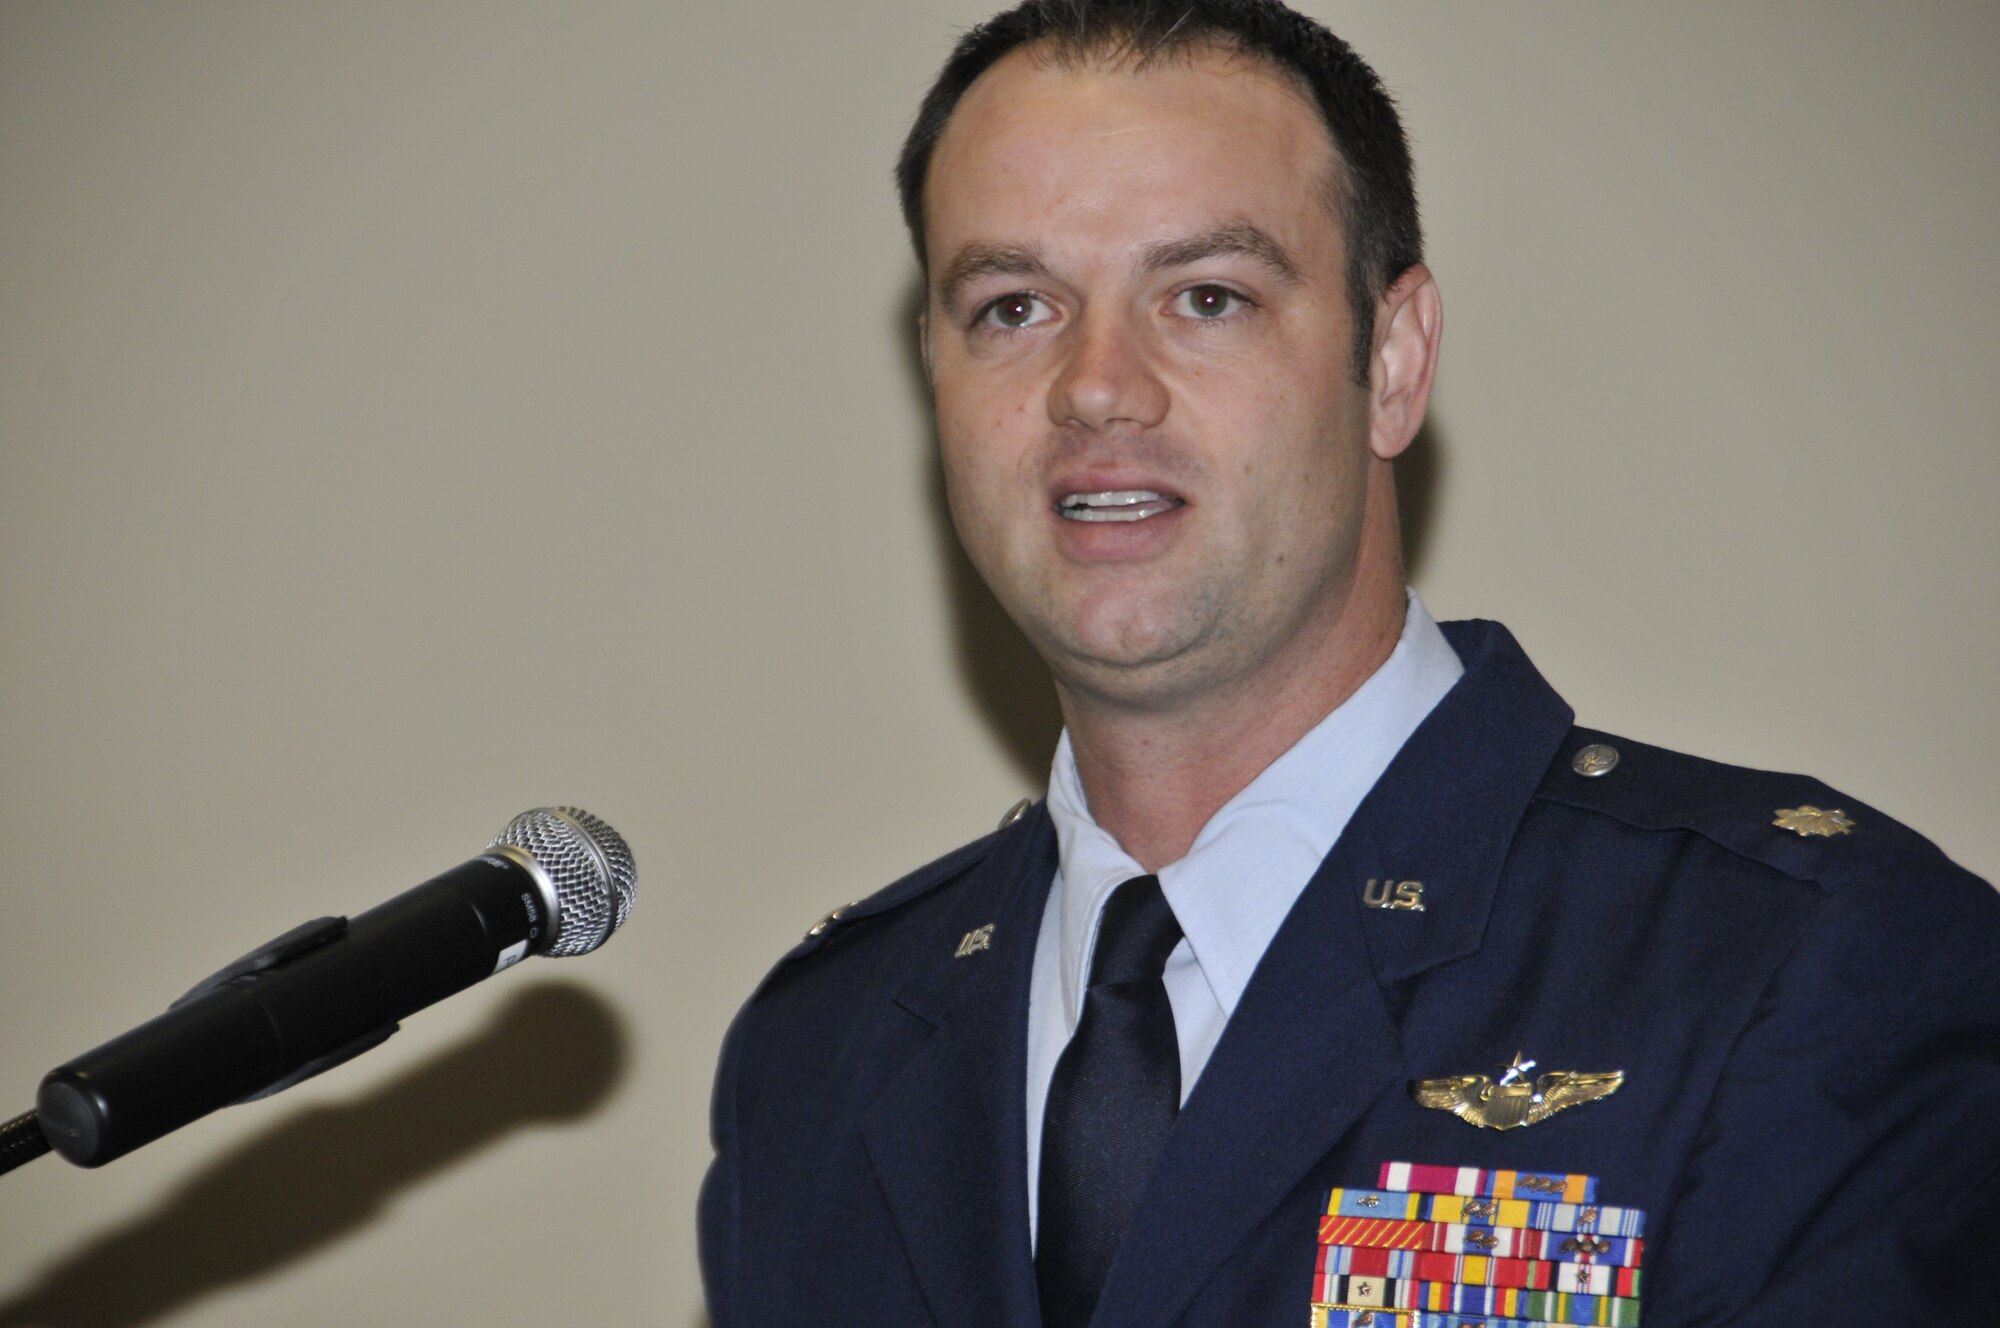 Lt. Col. Jeremiah Gentry, 184th Attack Squadron commander, addresses the audience during an assumption of command ceremony held March 8, 2015 at Ebbing Air National Guard Base, Fort Smith, Ark. Gentry, a former A-10 Thunderbolt II "Warthog", MQ-9 Reaper and F-16 Falcon pilot, served on active duty for 11 years before transitioning to the Arkansas Air National Guard. (U.S. Air National Guard photo by Staff Sgt. John Suleski/released)